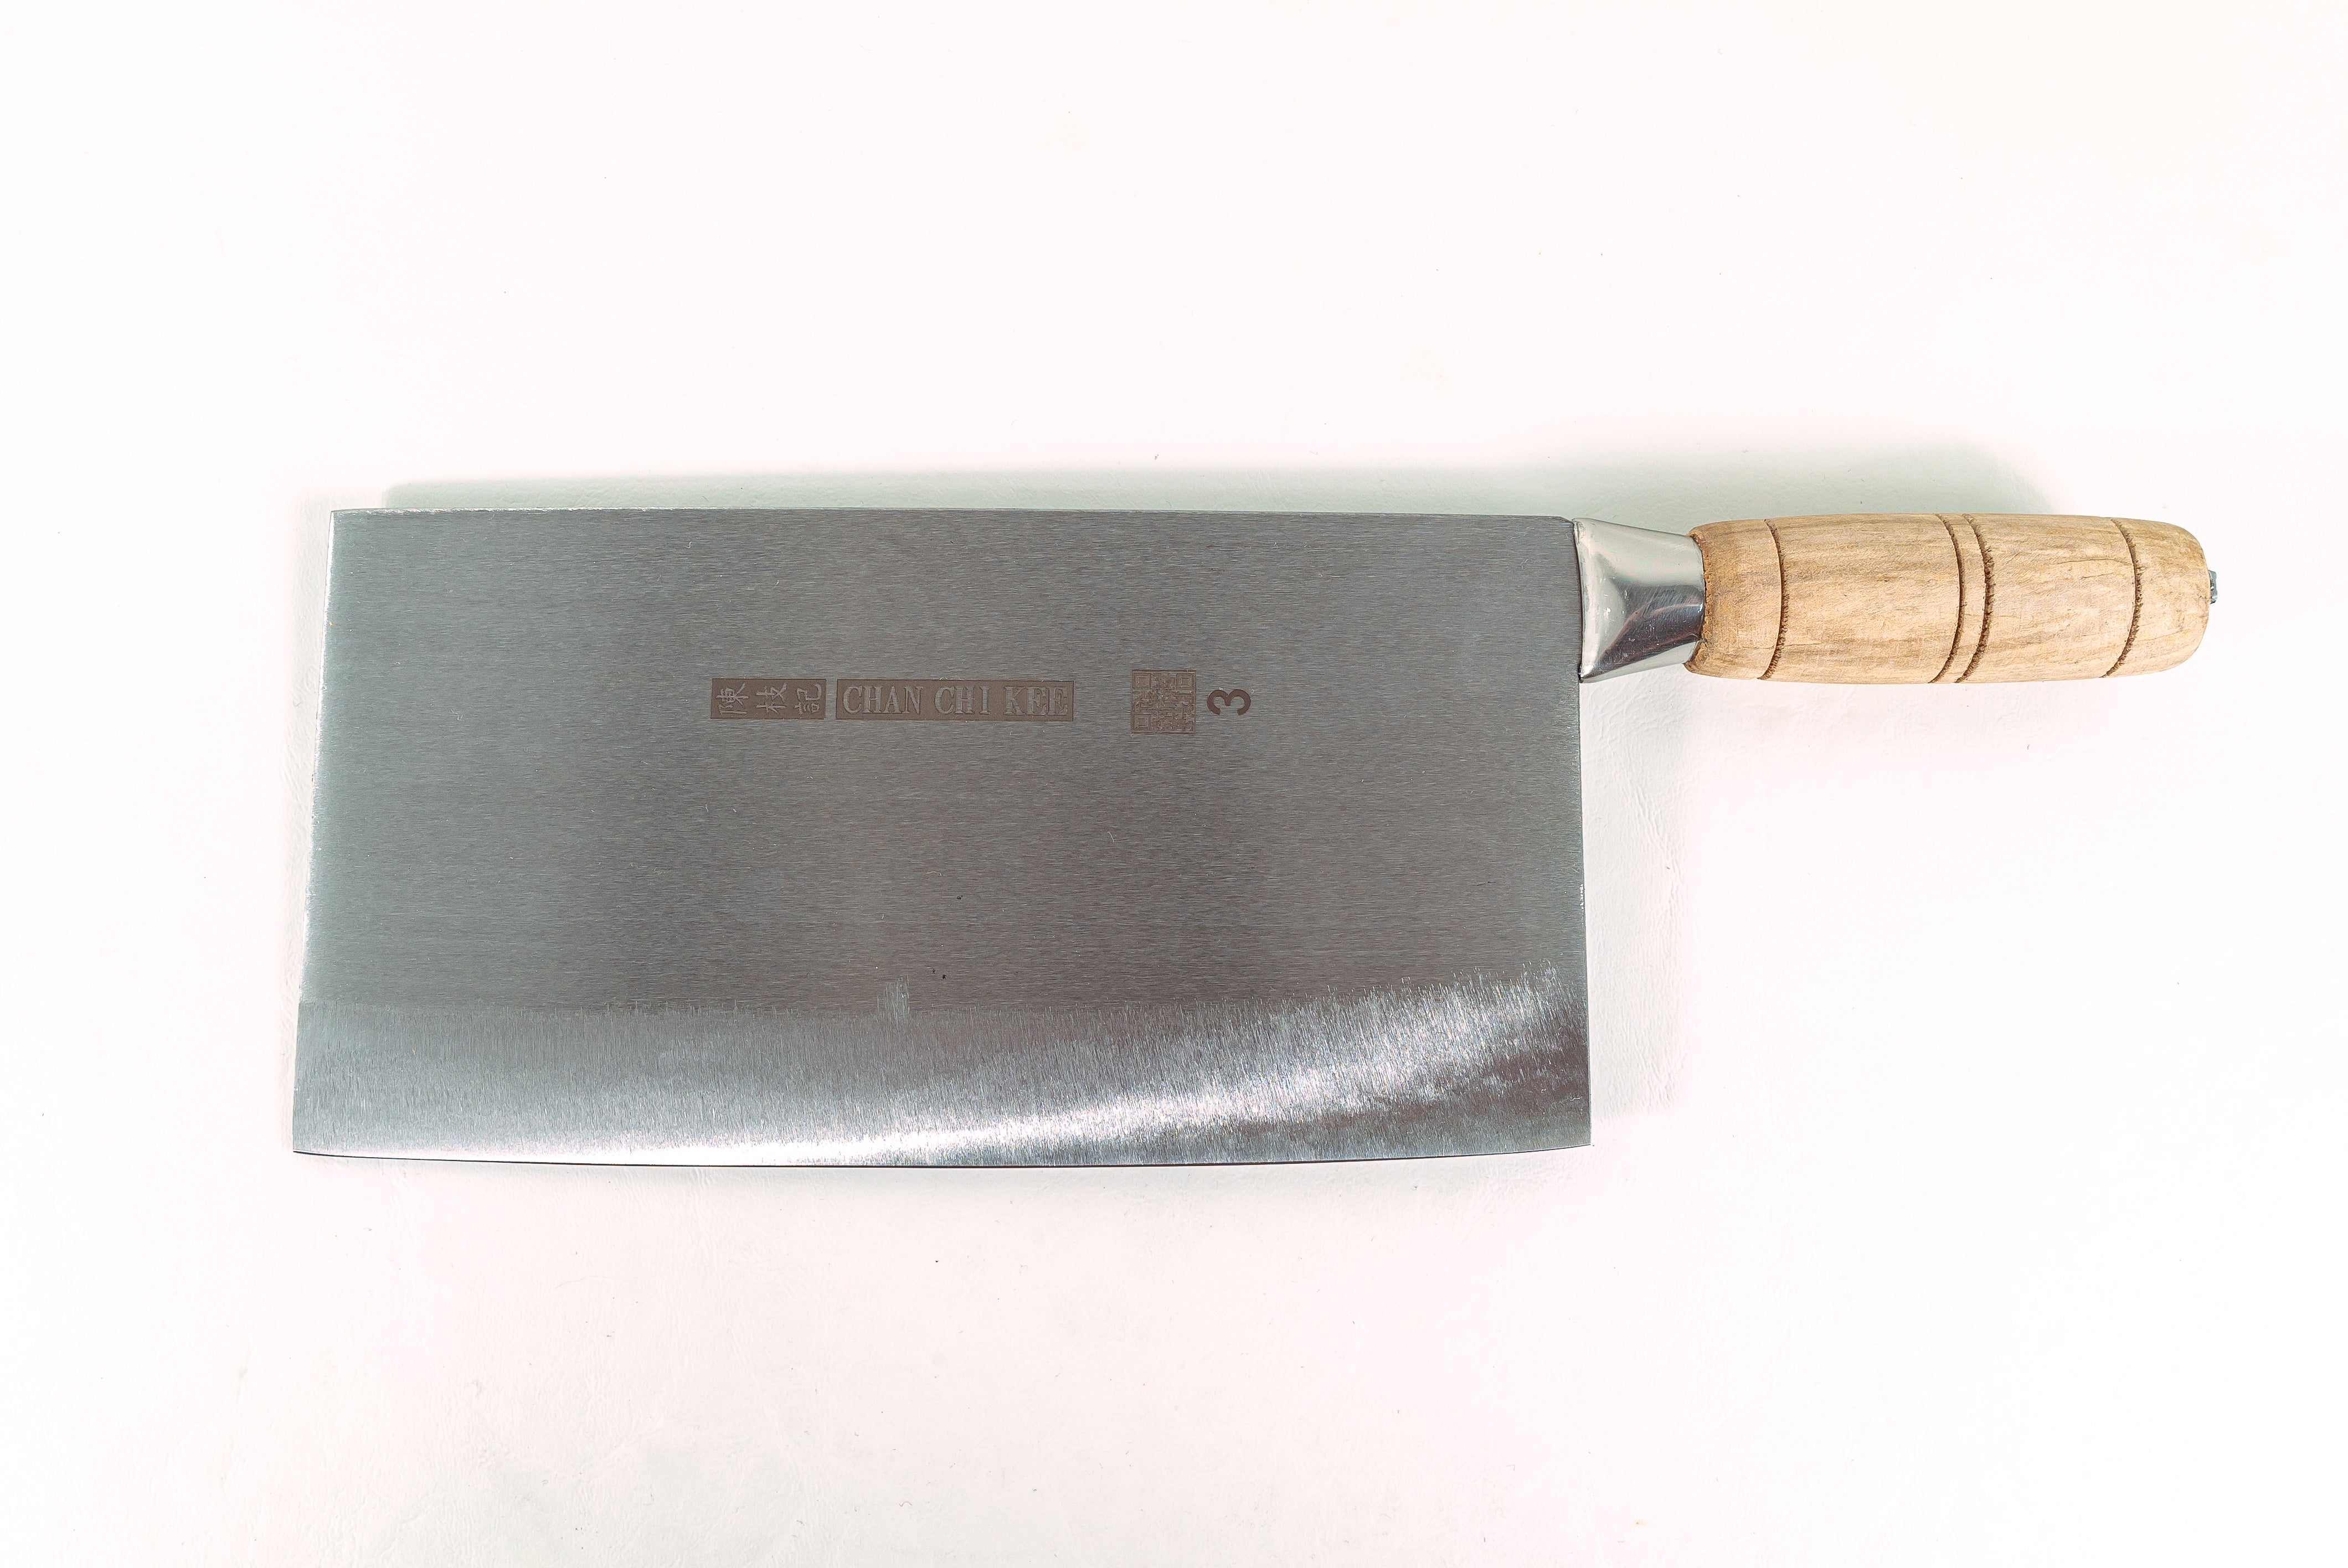 CCK Carbon Chinese Cleaver – Chefs Edge - Handmade Japanese Kitchen Knives